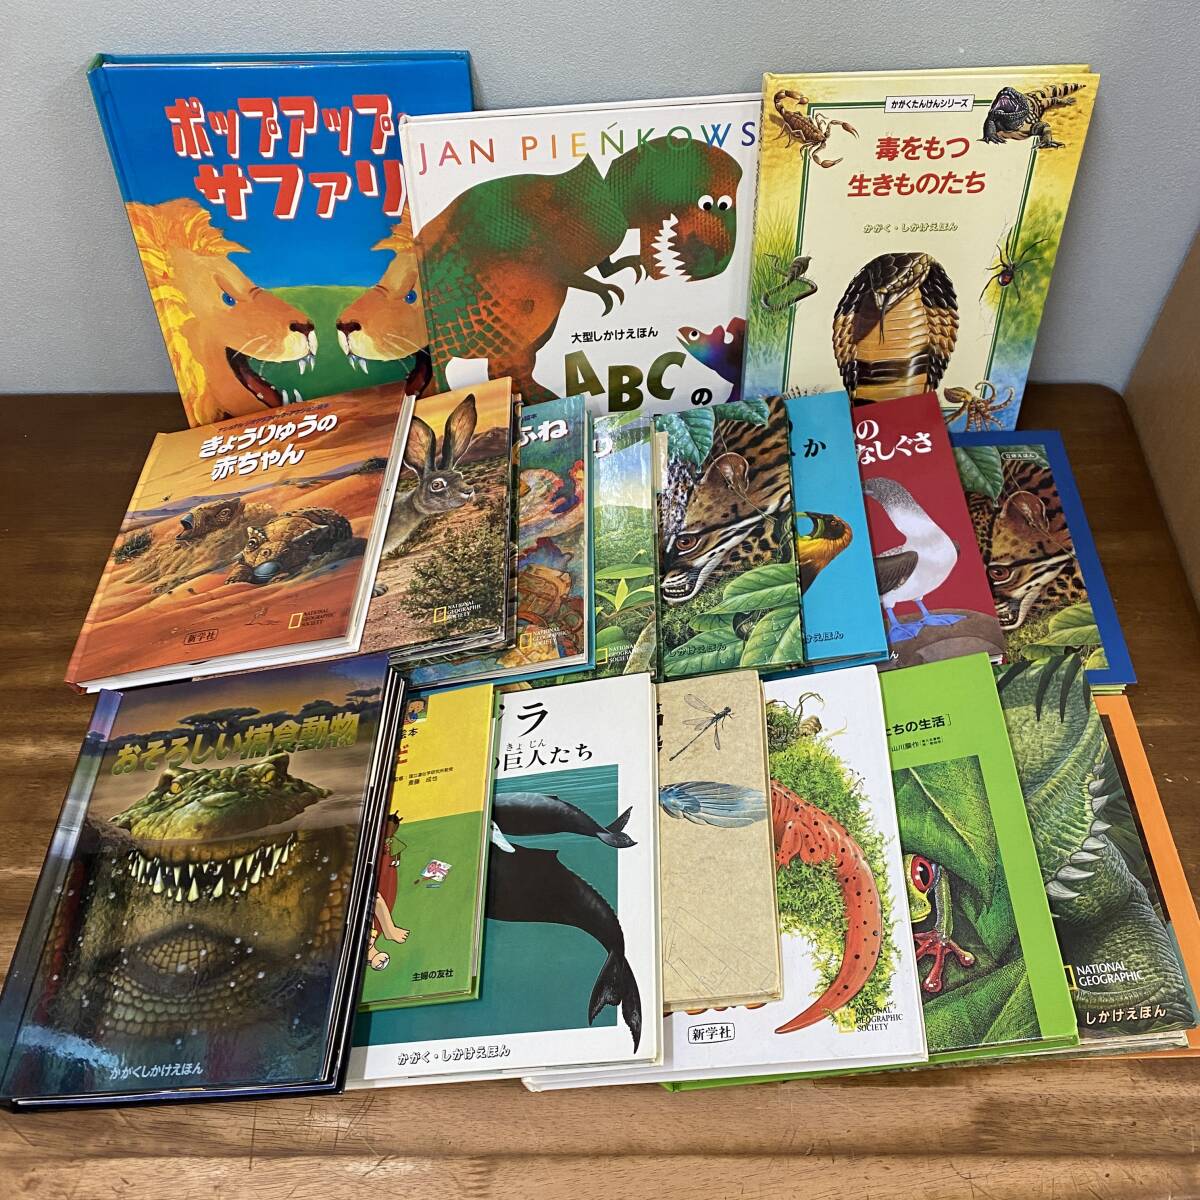  device picture book only large amount total 19 pcs. study beginning picture book stone chip puts out picture book together beautiful goods child care . kindergarten masterpiece popular set dinosaur picture book 3